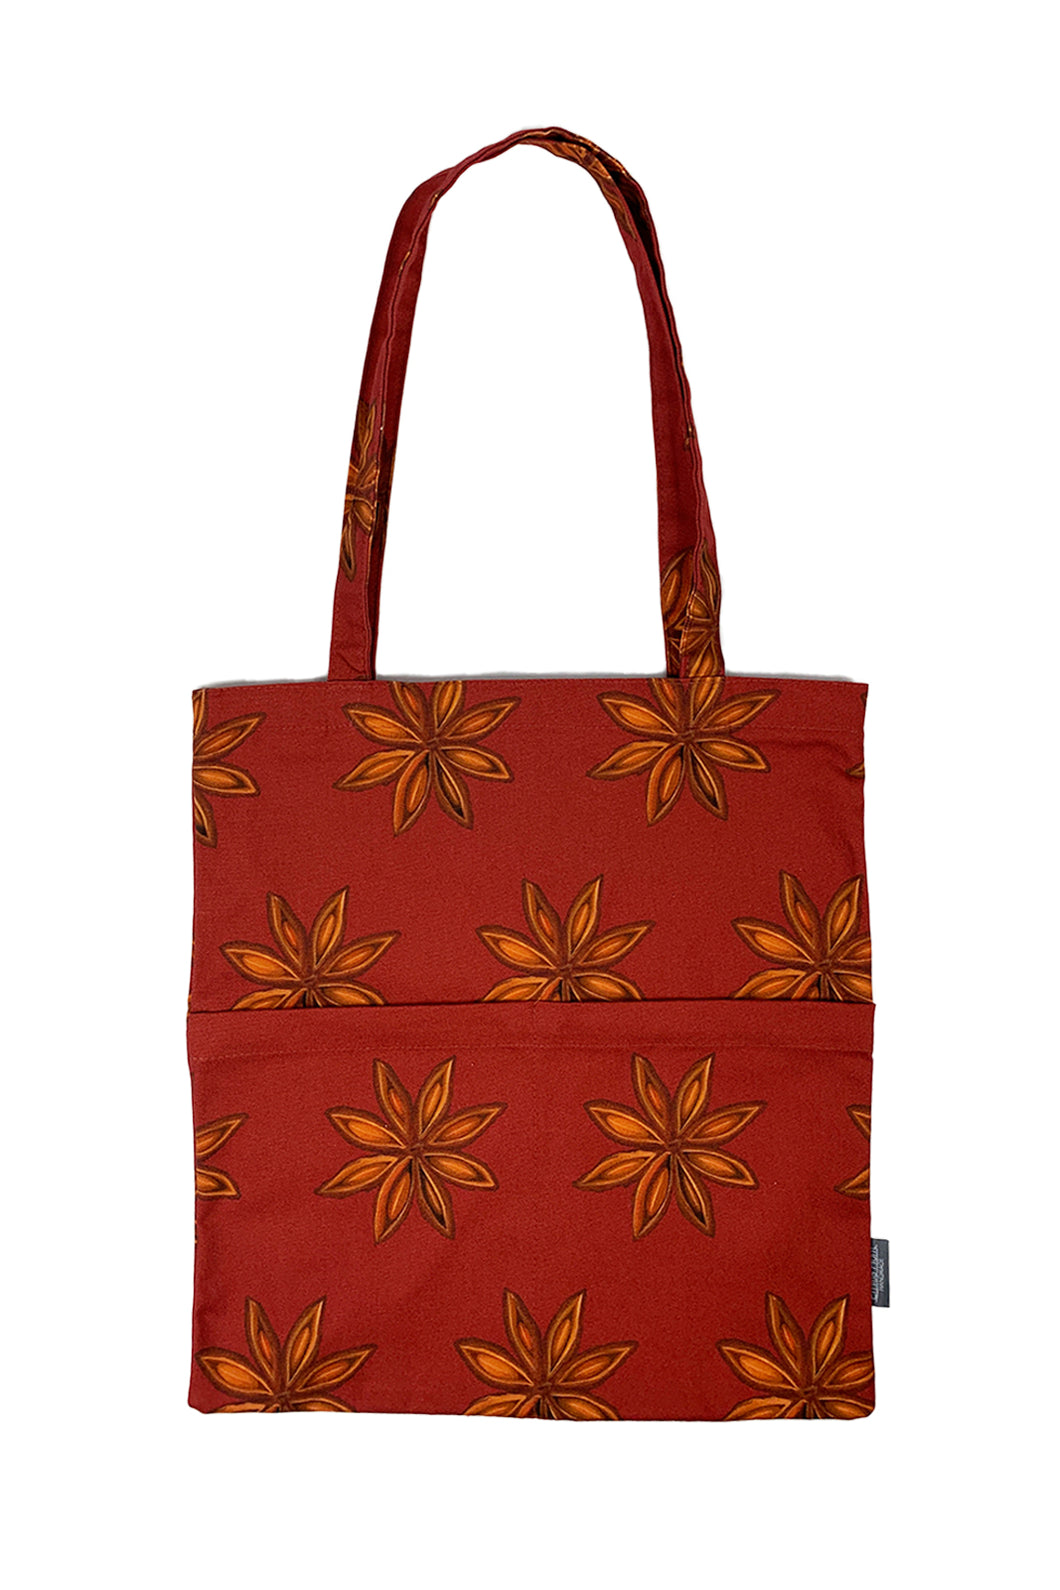 Star anise tote bag